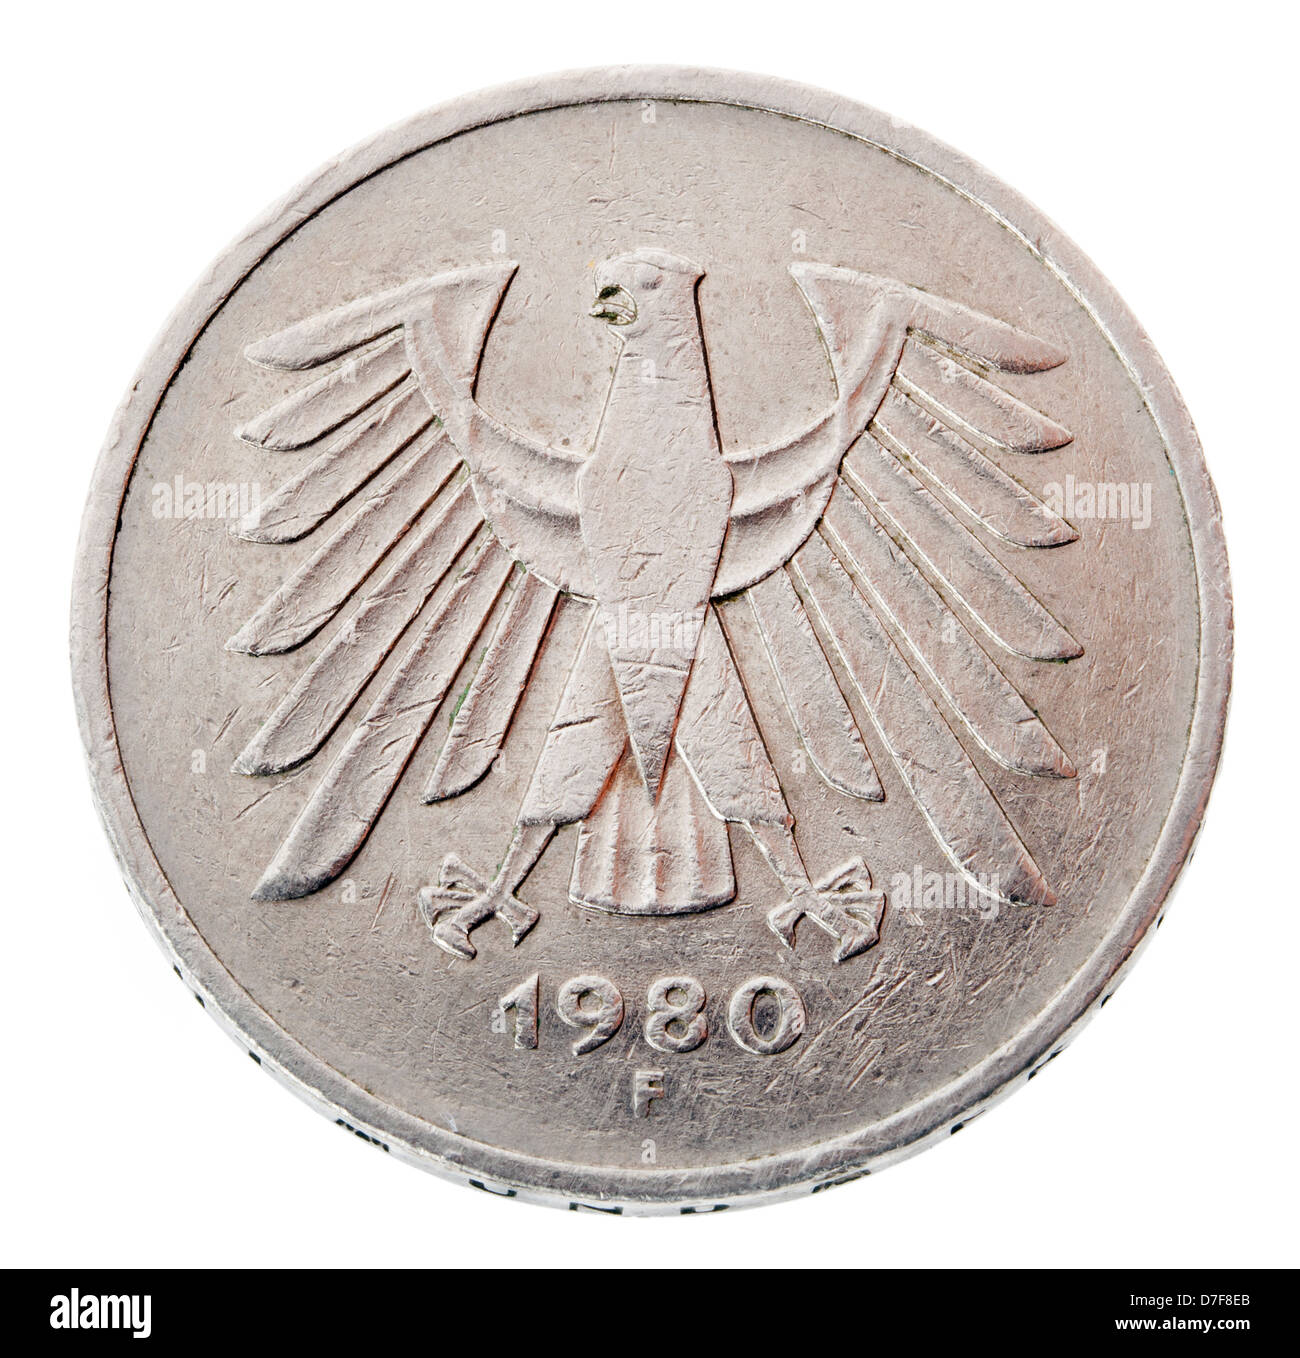 Frontal view reverse (tails) side a 5 Deutsche Mark (DM) coin minted in 1980. Depicted is German coat arms - German eagle. Stock Photo